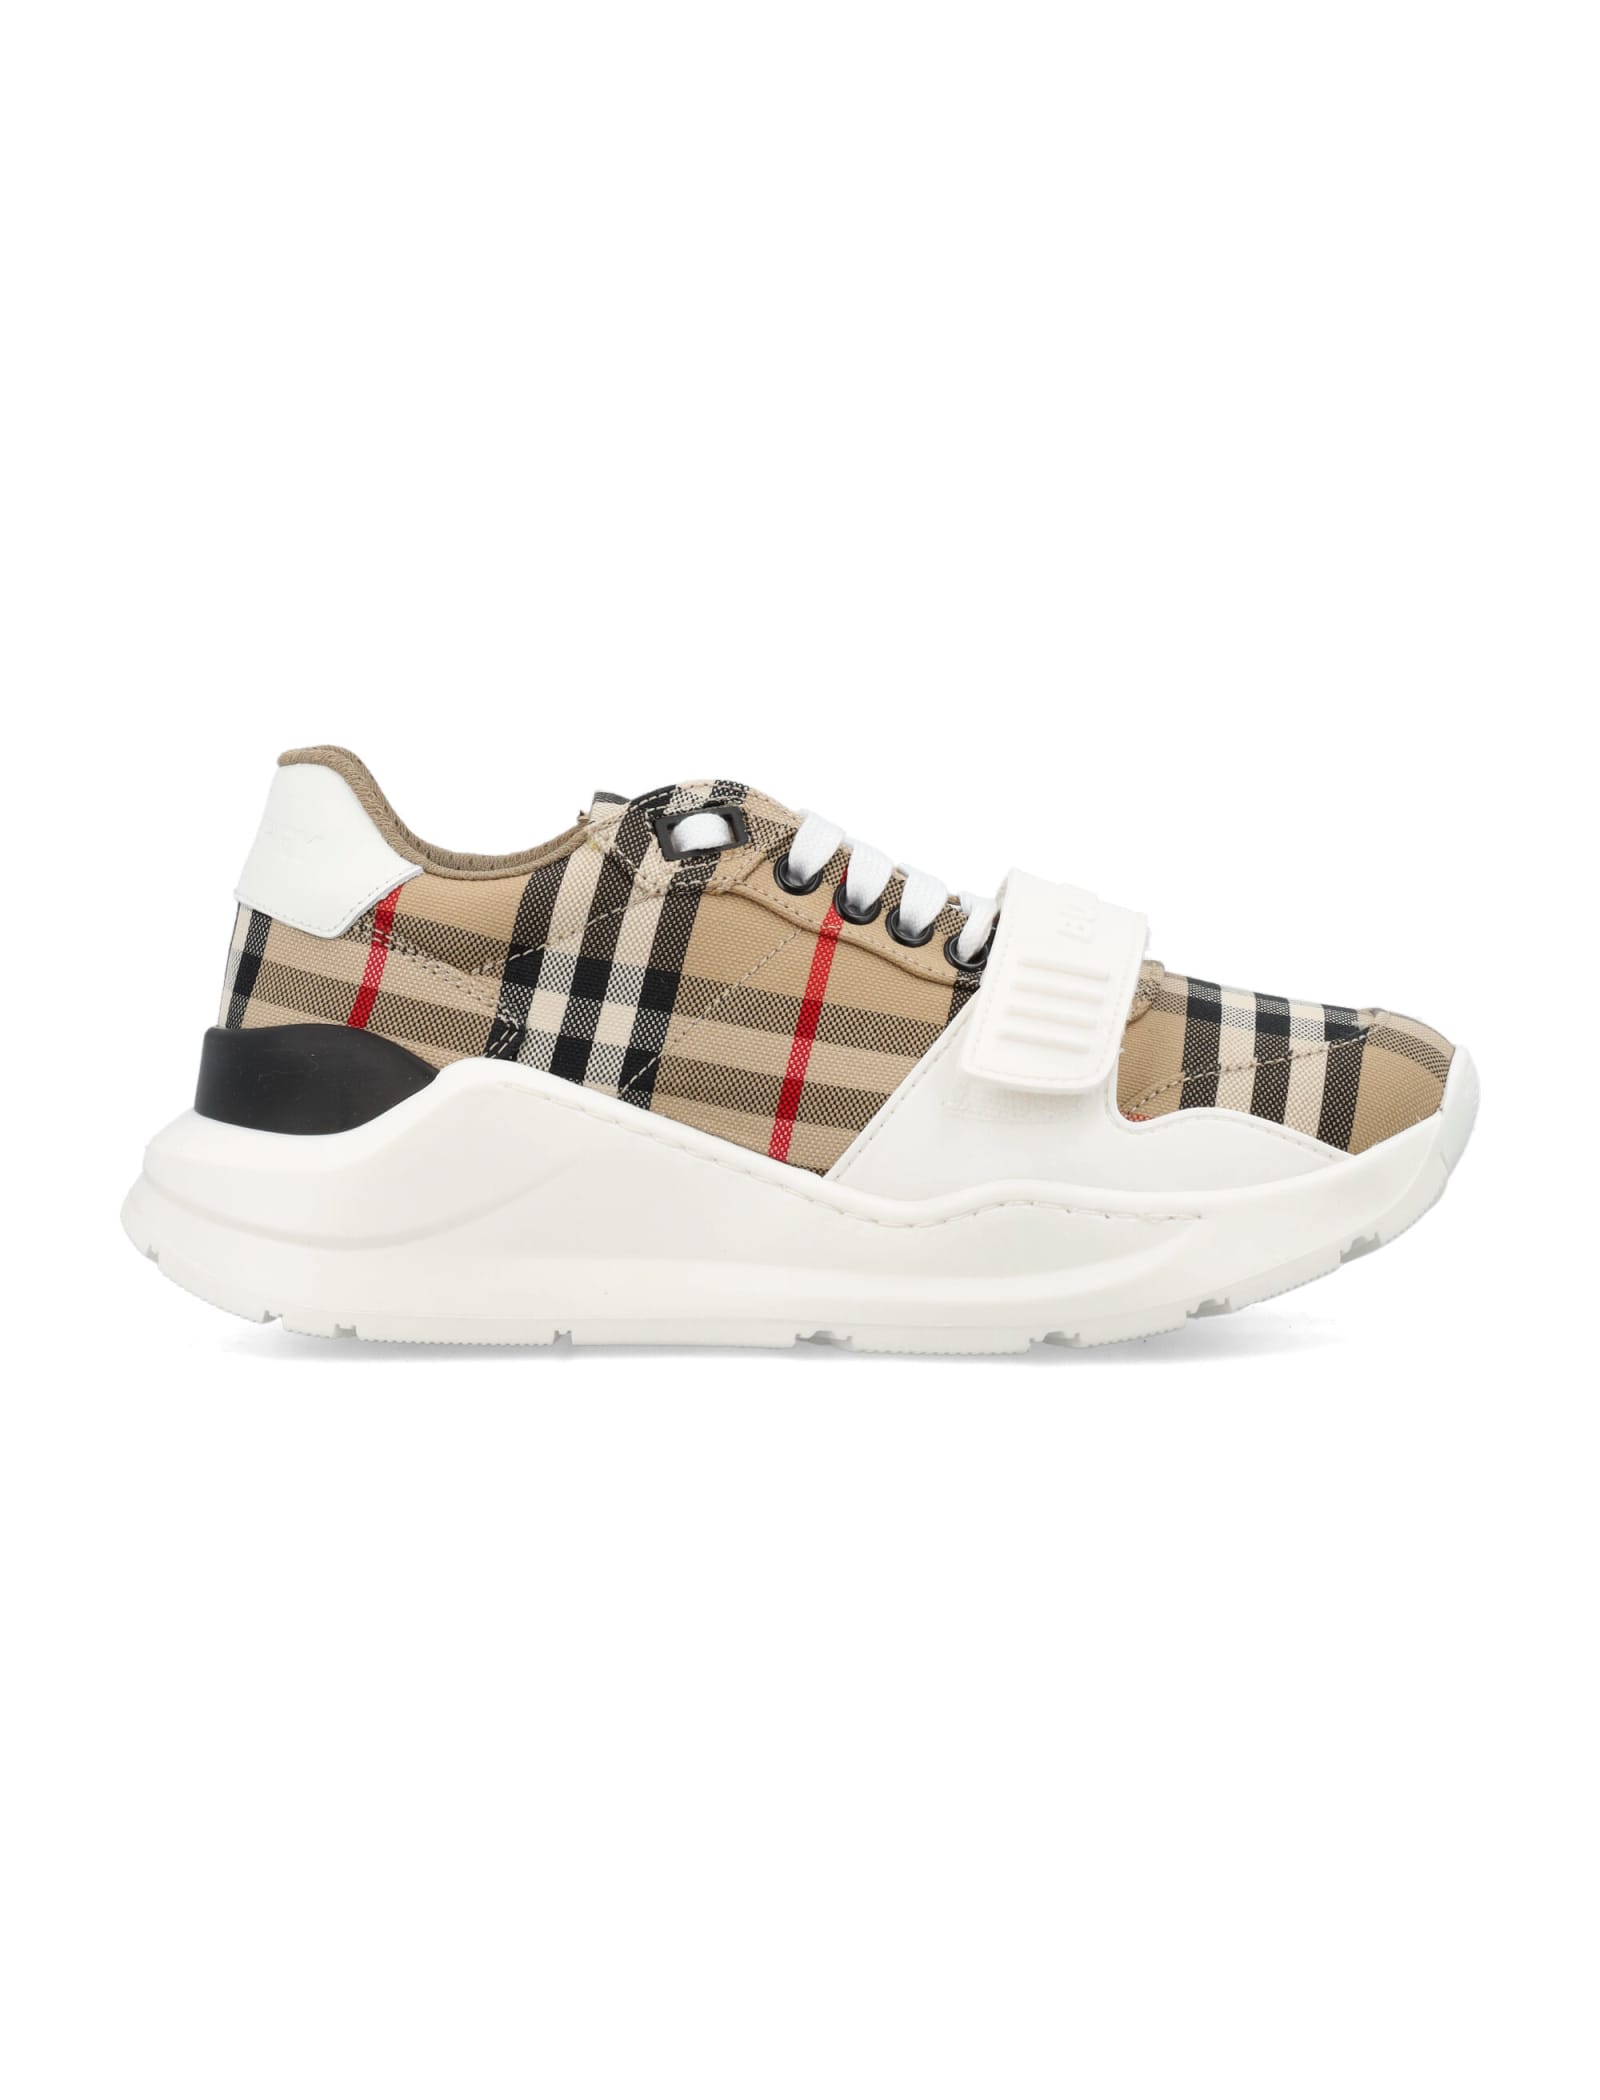 BURBERRY CHECK AND LEATHER SNEAKERS